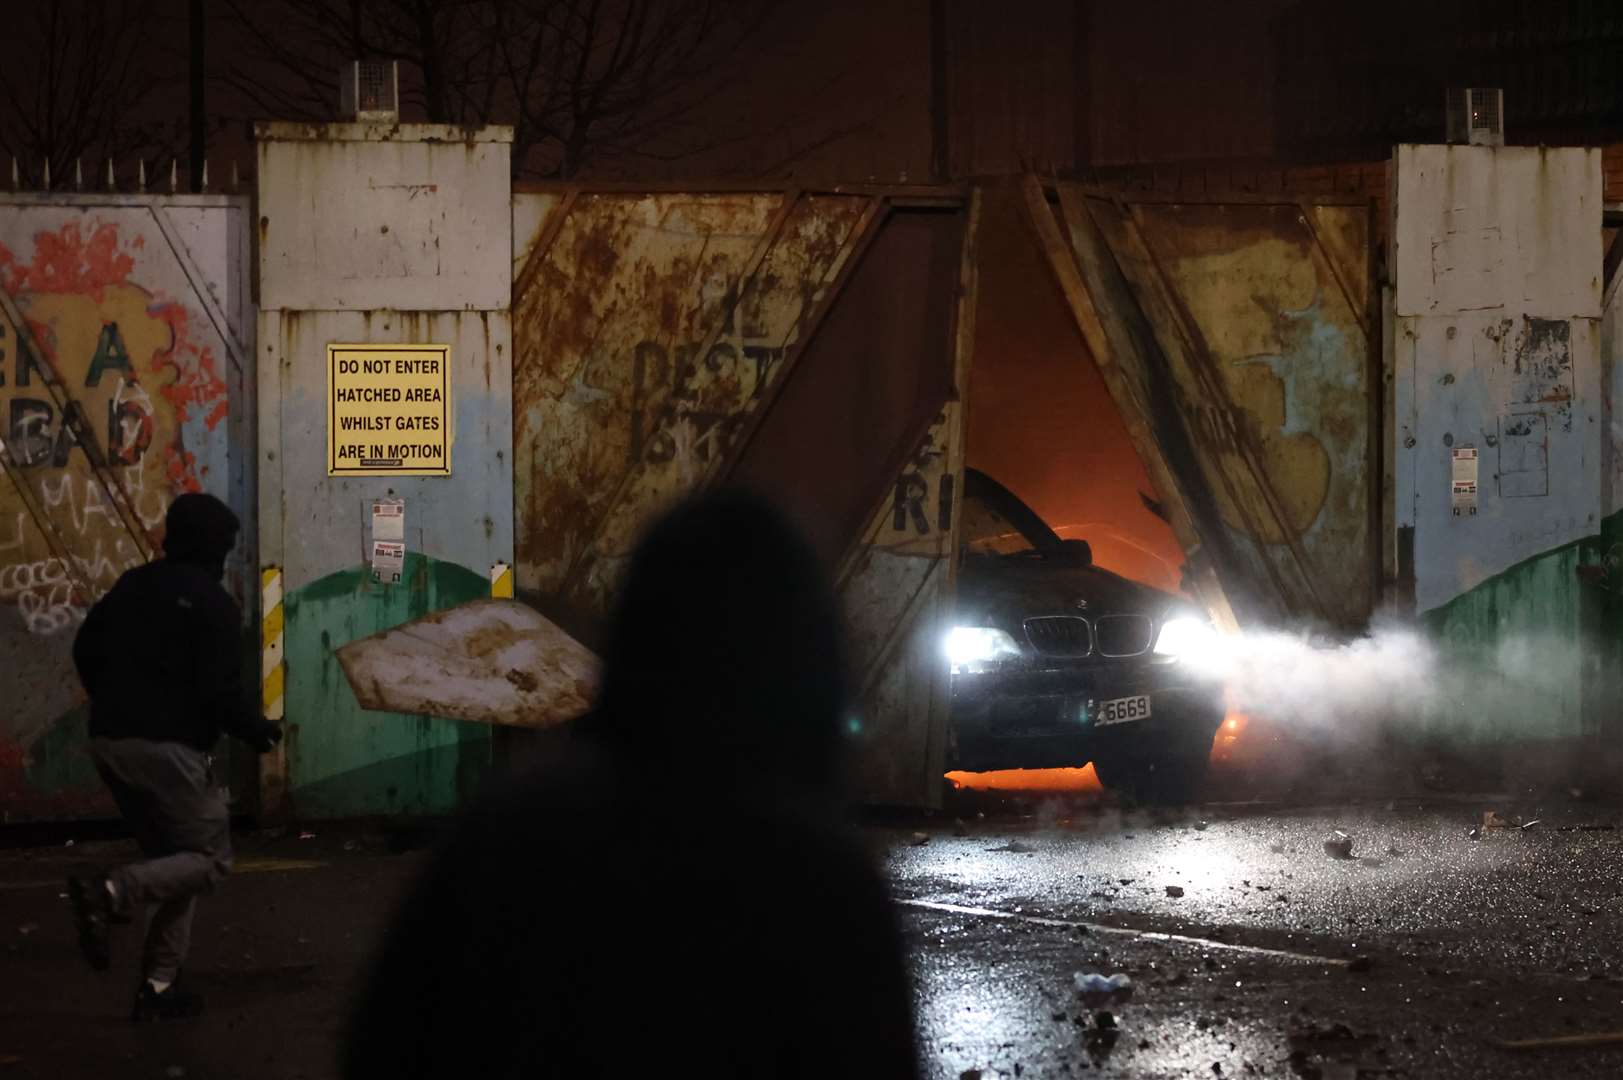 A car bursts through the Peace Gates in Lanark Way on Wednesday night (Liam McBurney/PA)